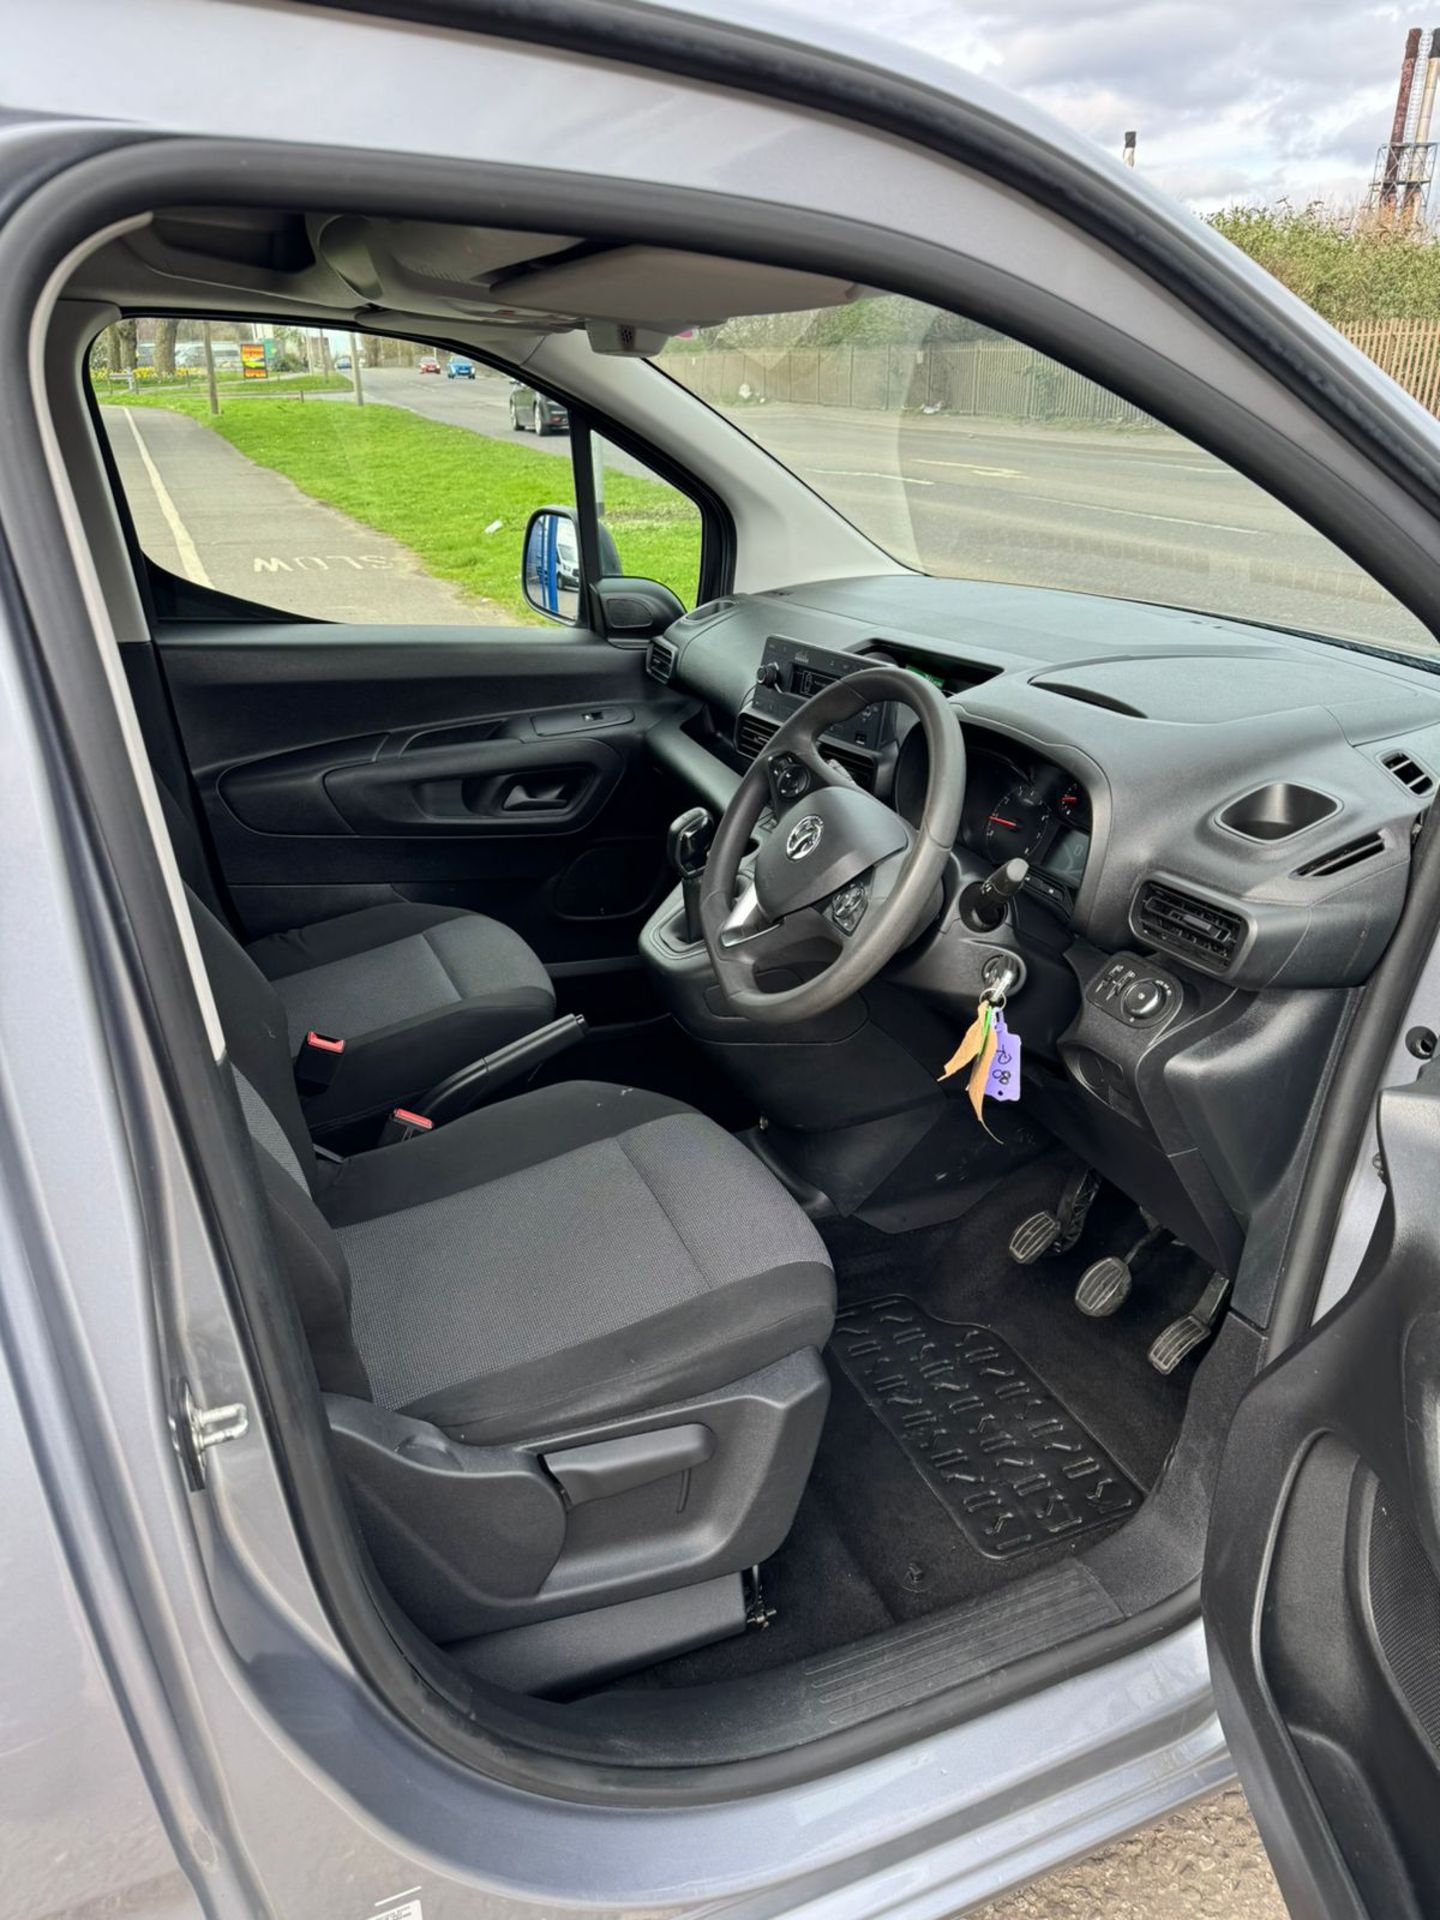 2020 20 VAUXHALL COMBO SPORTIVE PANEL VAN - 51K MILES - PLY LINED - AIR CON - Image 6 of 11